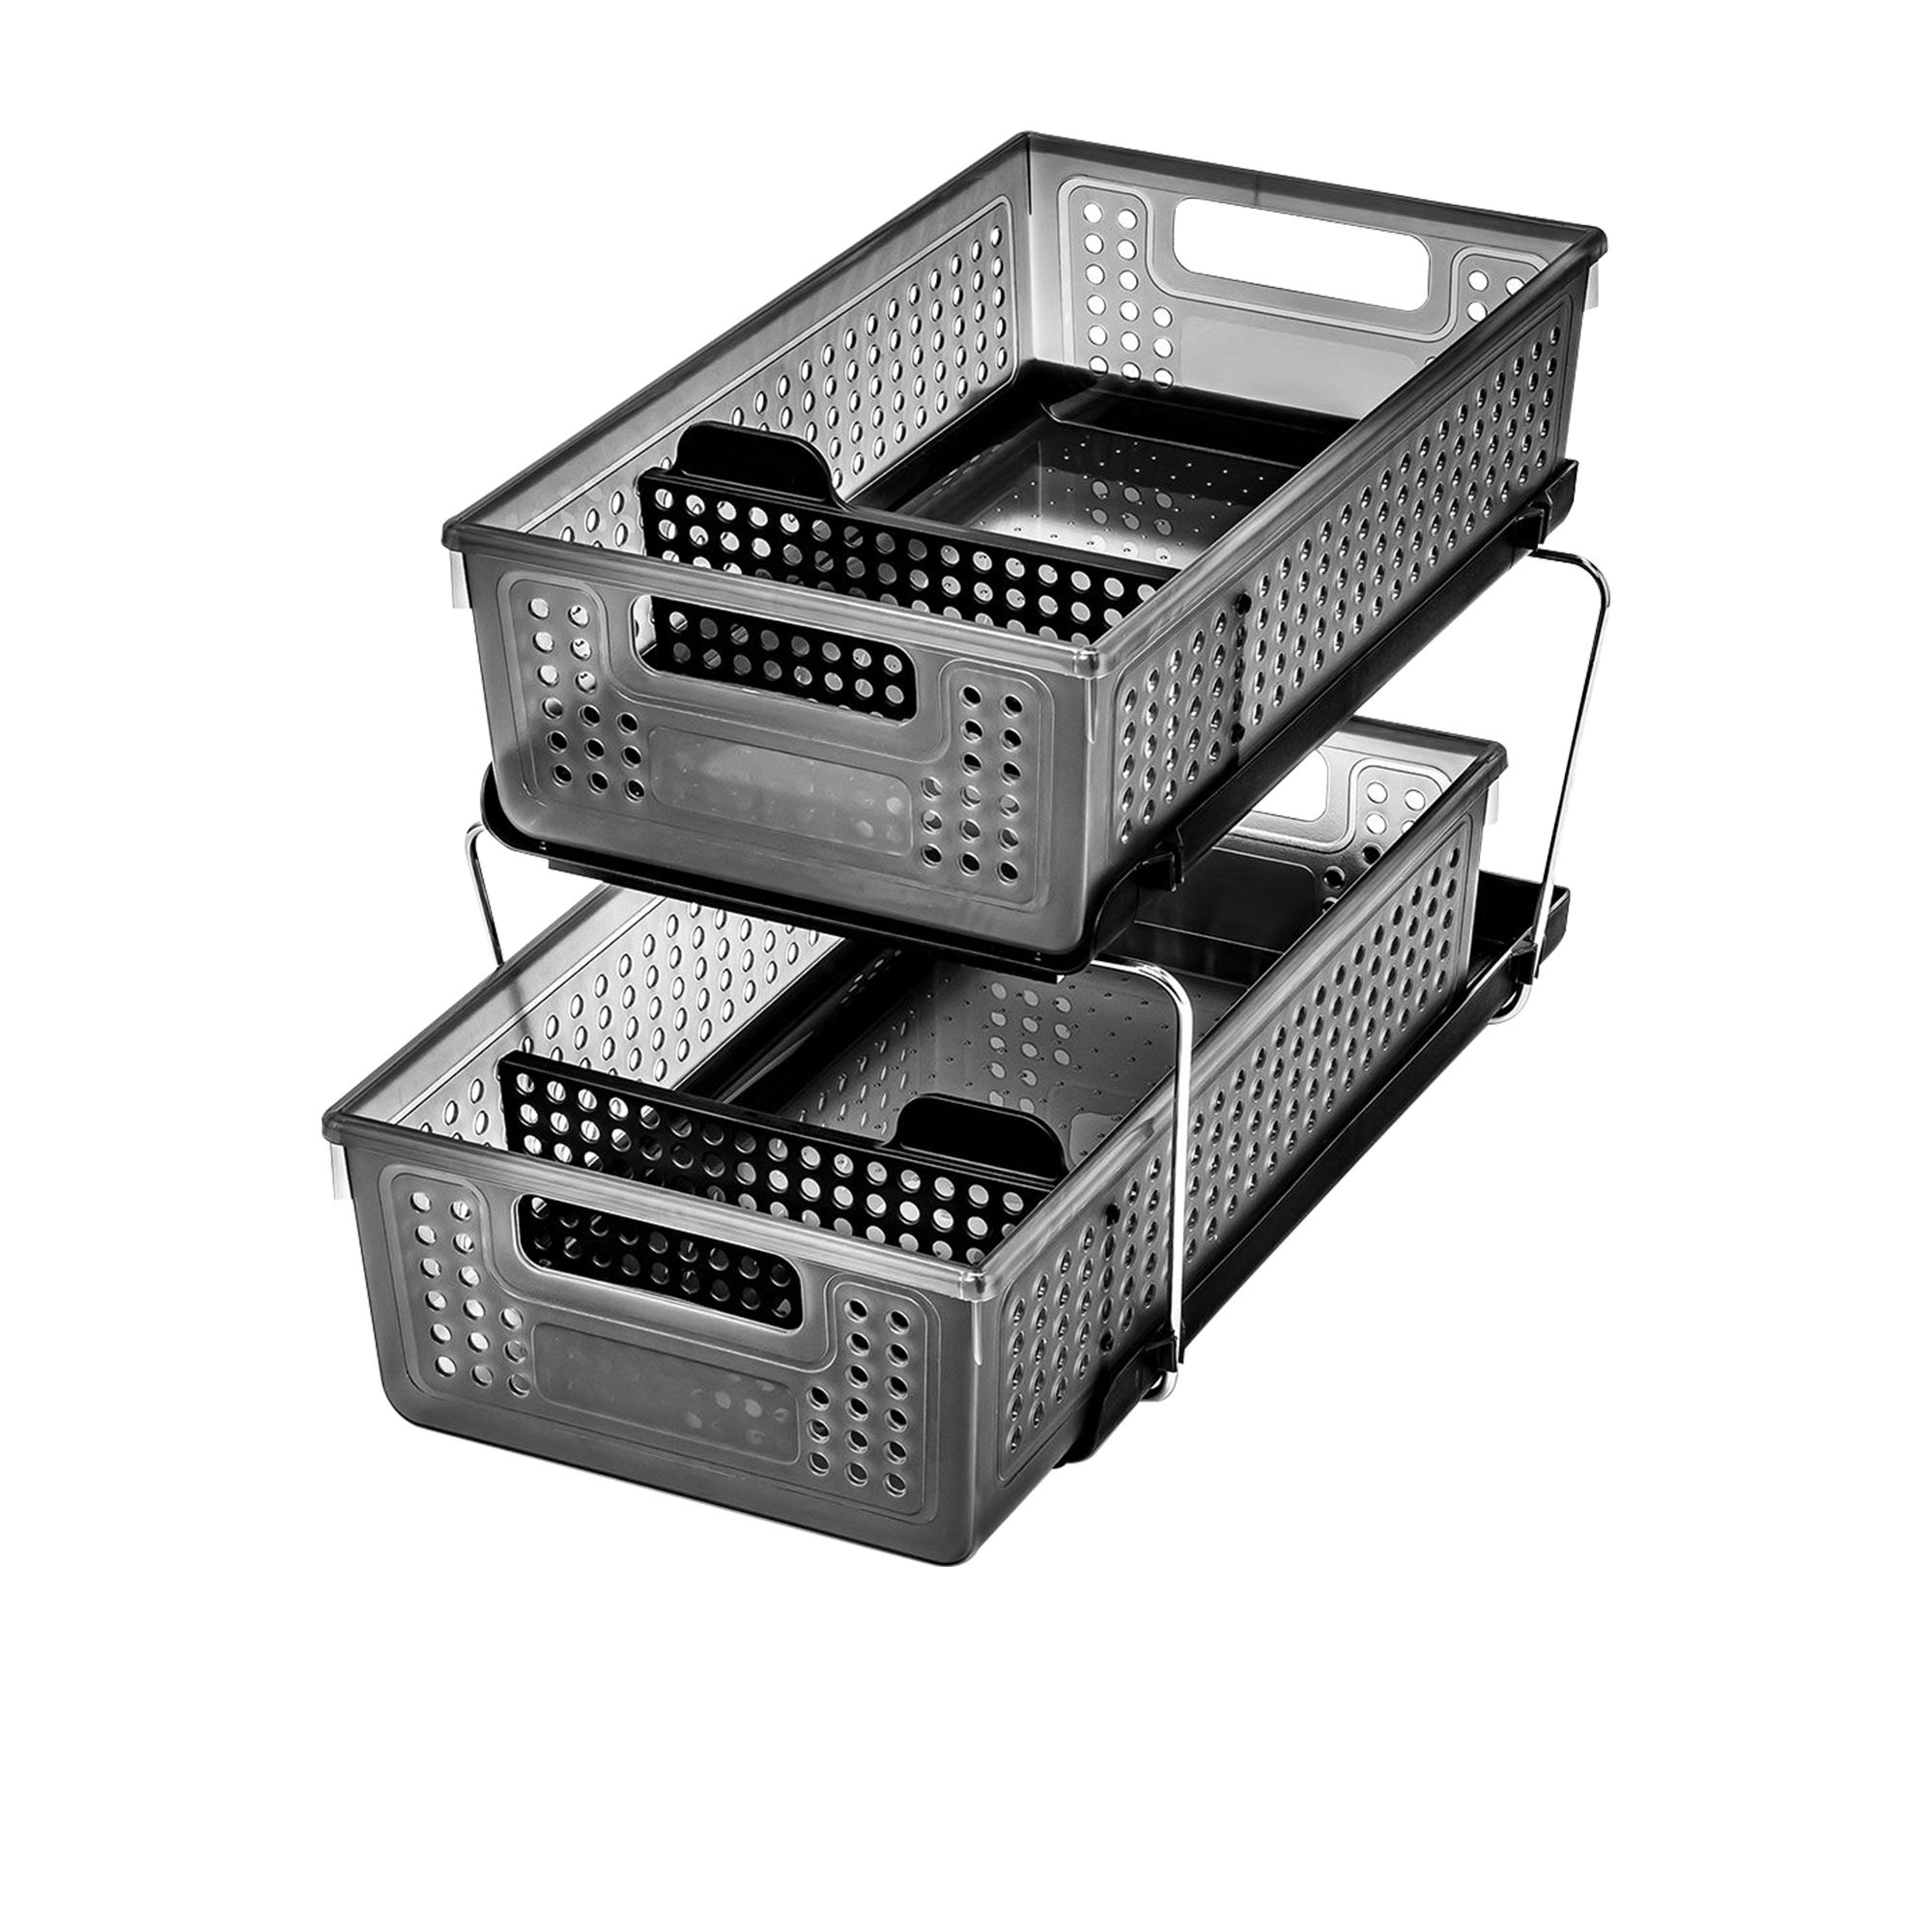 Madesmart 2 Tier Organiser with Dividers Carbon Image 1